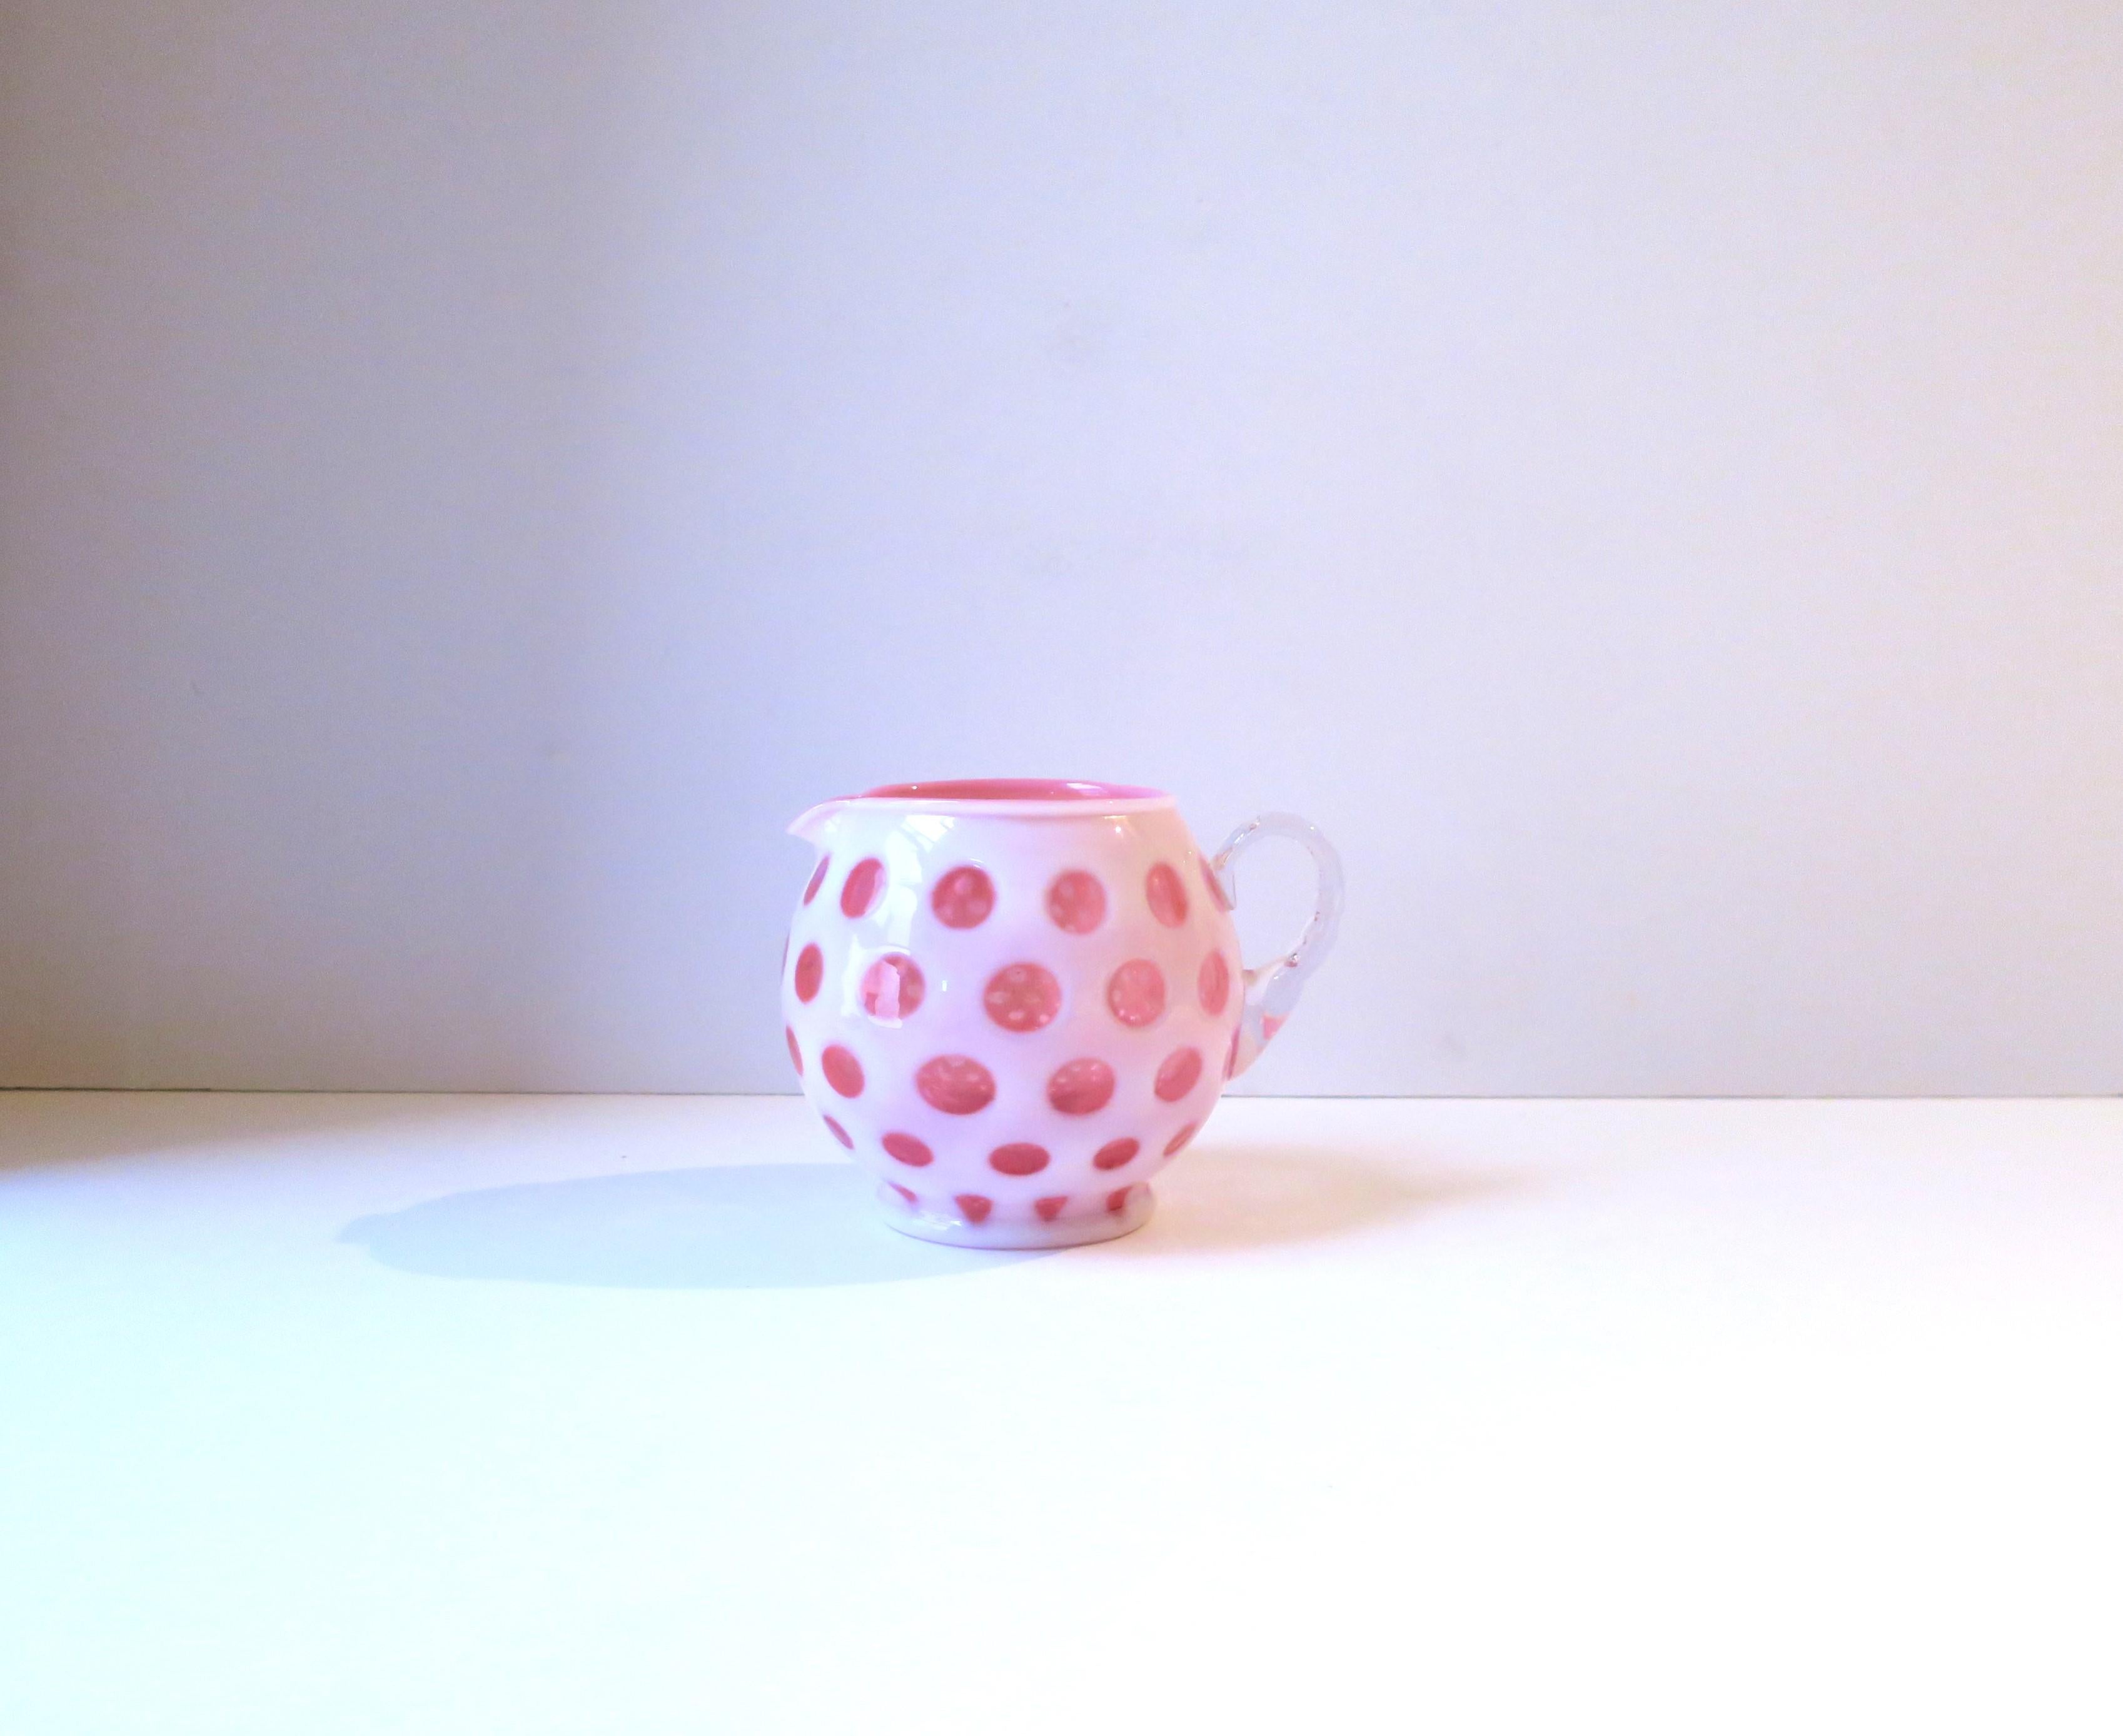 A beautiful vintage pink and white art glass pitcher or vase with polka dot design, circa early to mid-20th century, USA. A beautiful white and pink polka dot art glass pitcher with clear/transparent handle. Great as a standalone piece, on a shelf,